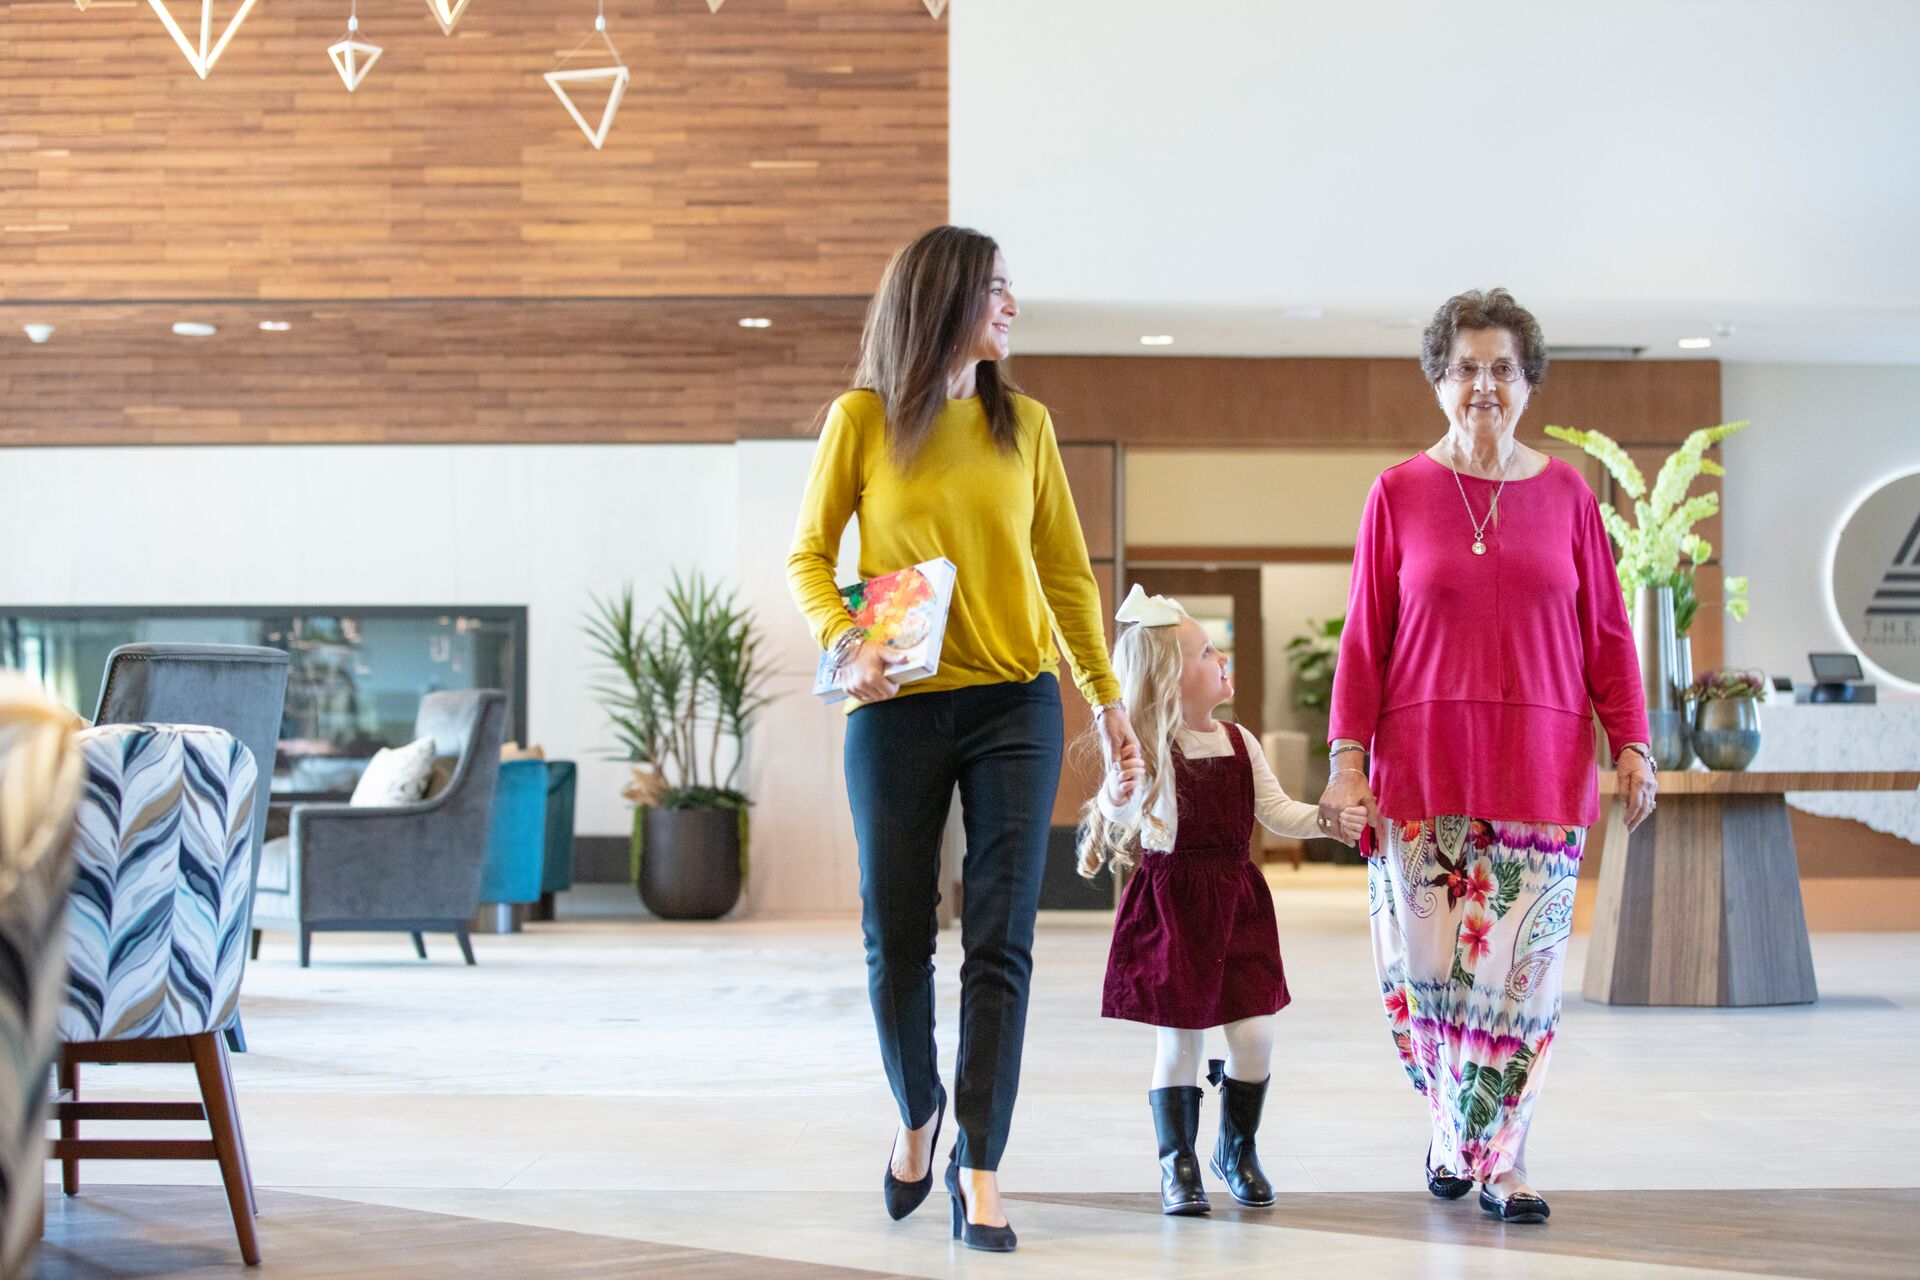 A grandmother, daughter, and granddaughter walk together